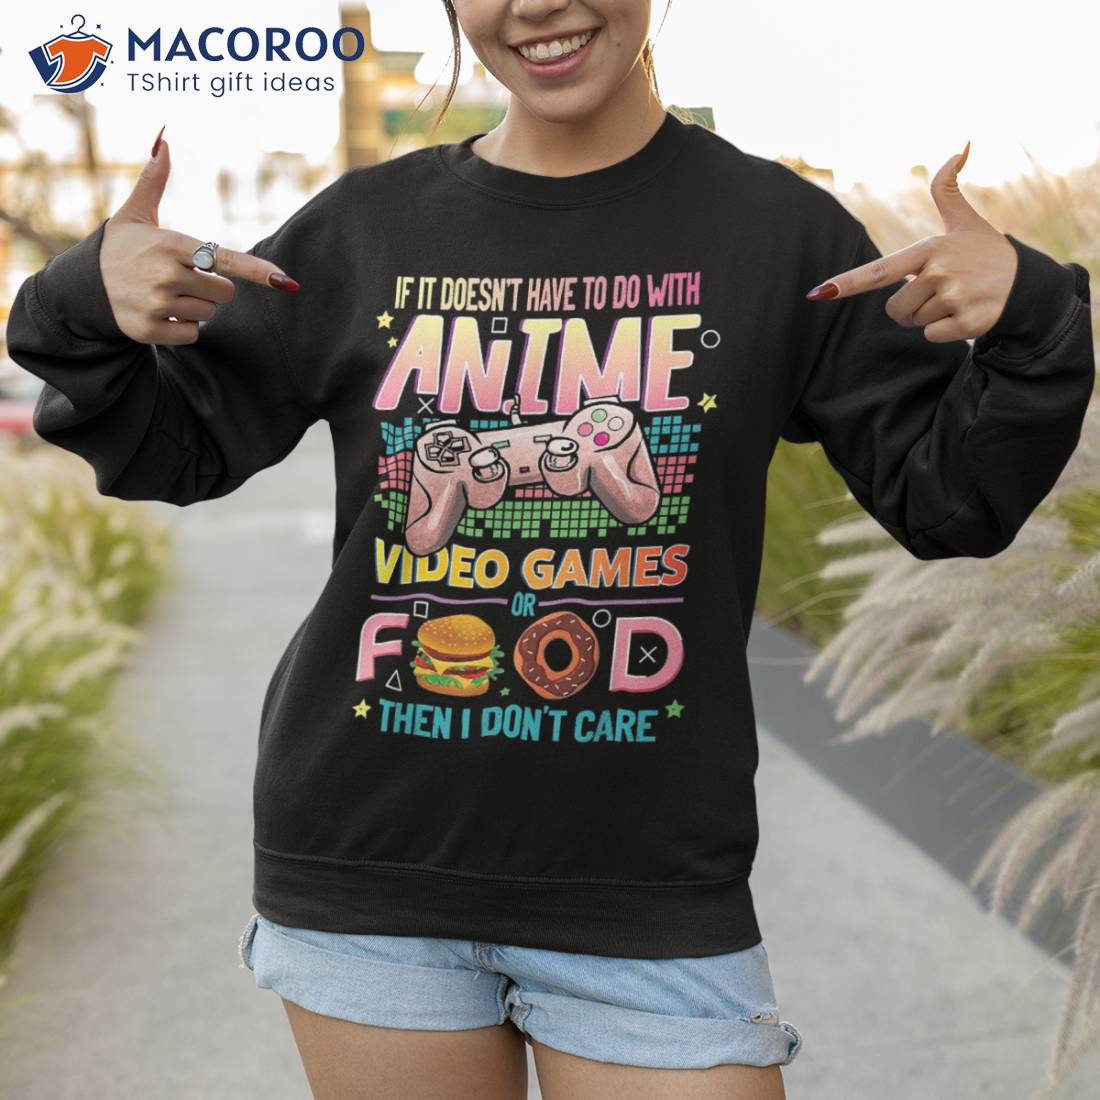 Cool Gifts for Anime Lovers - YouTube